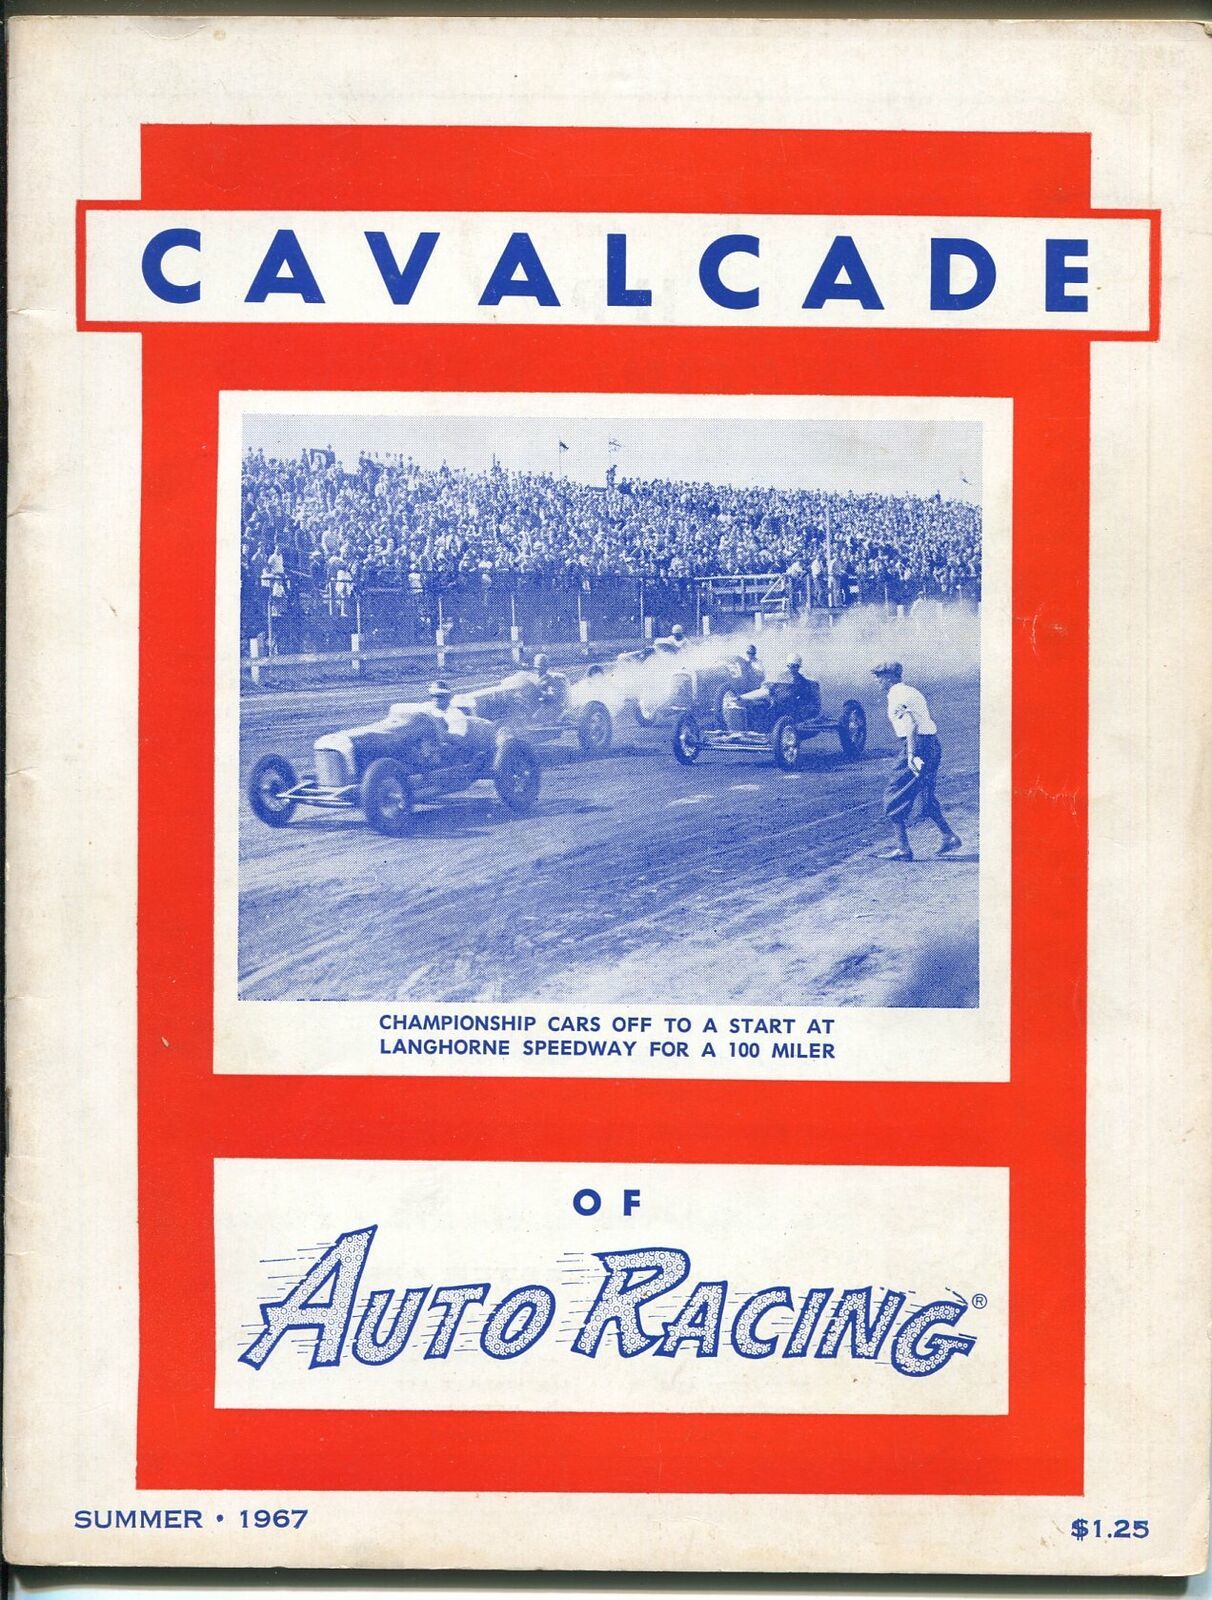 Primary image for Cavalcade Of Auto Racing -1967-Richard Petty-NASCAR-USAC-Rutherford-VG